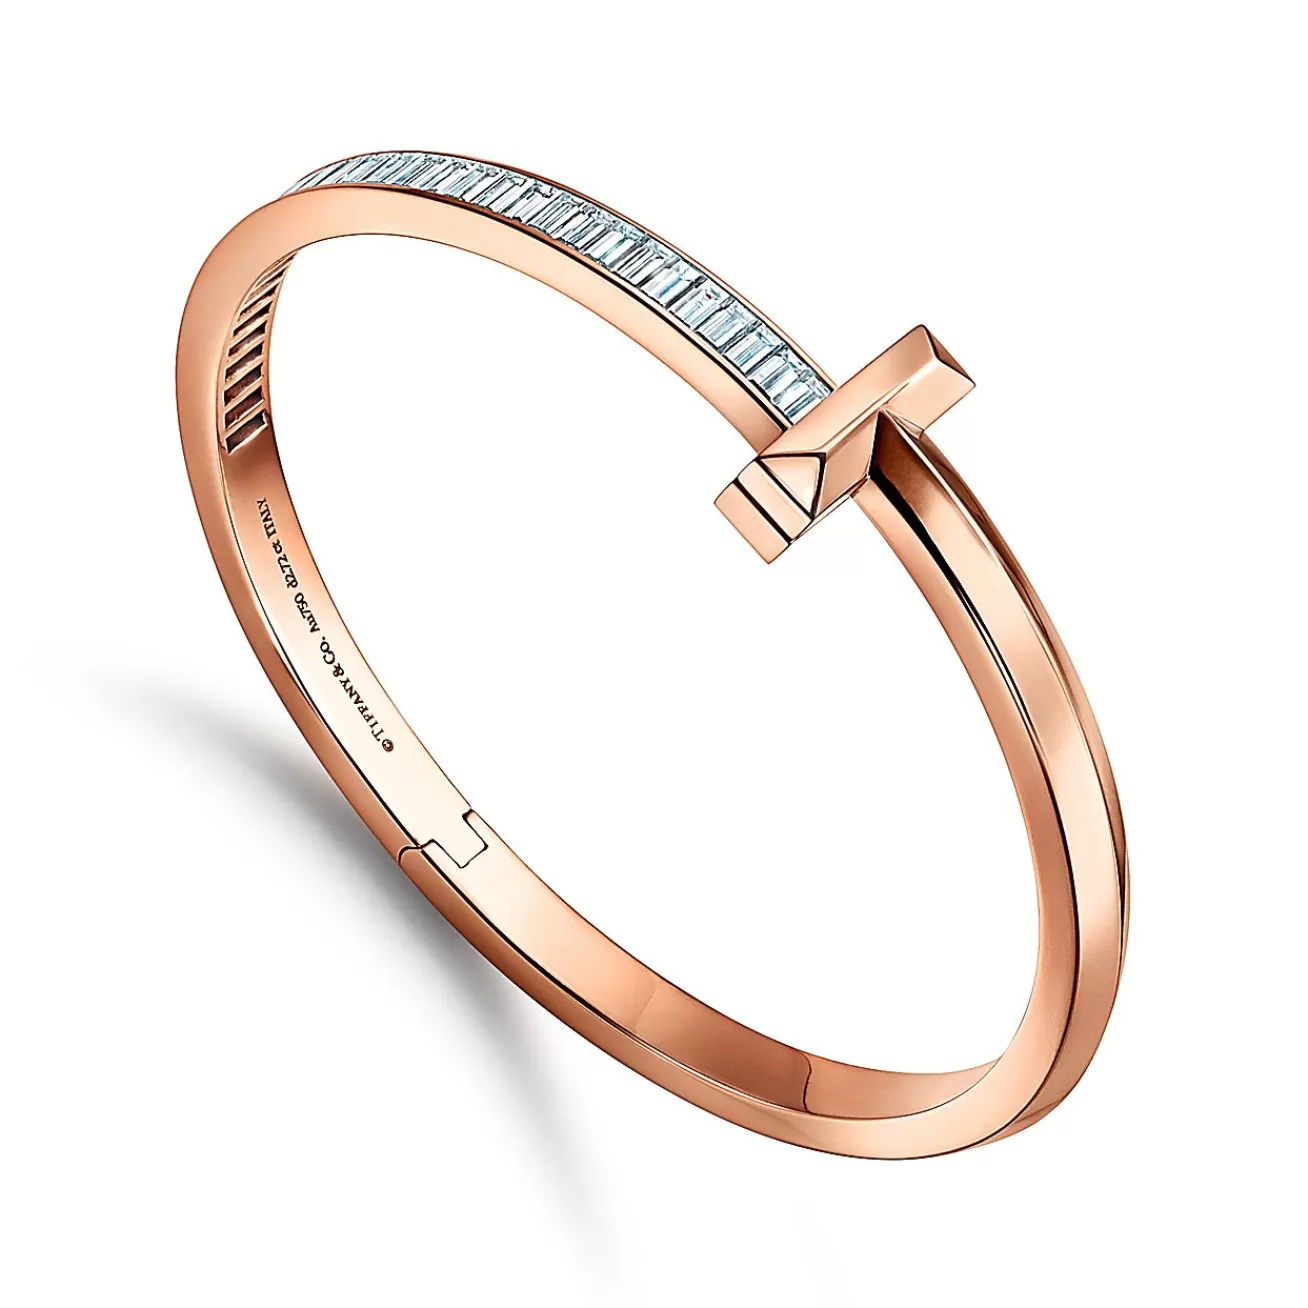 Tiffany & Co. Tiffany T T1 wide hinged bangle in 18k rose gold with baguette diamonds, large. | ^ Bracelets | Rose Gold Jewelry